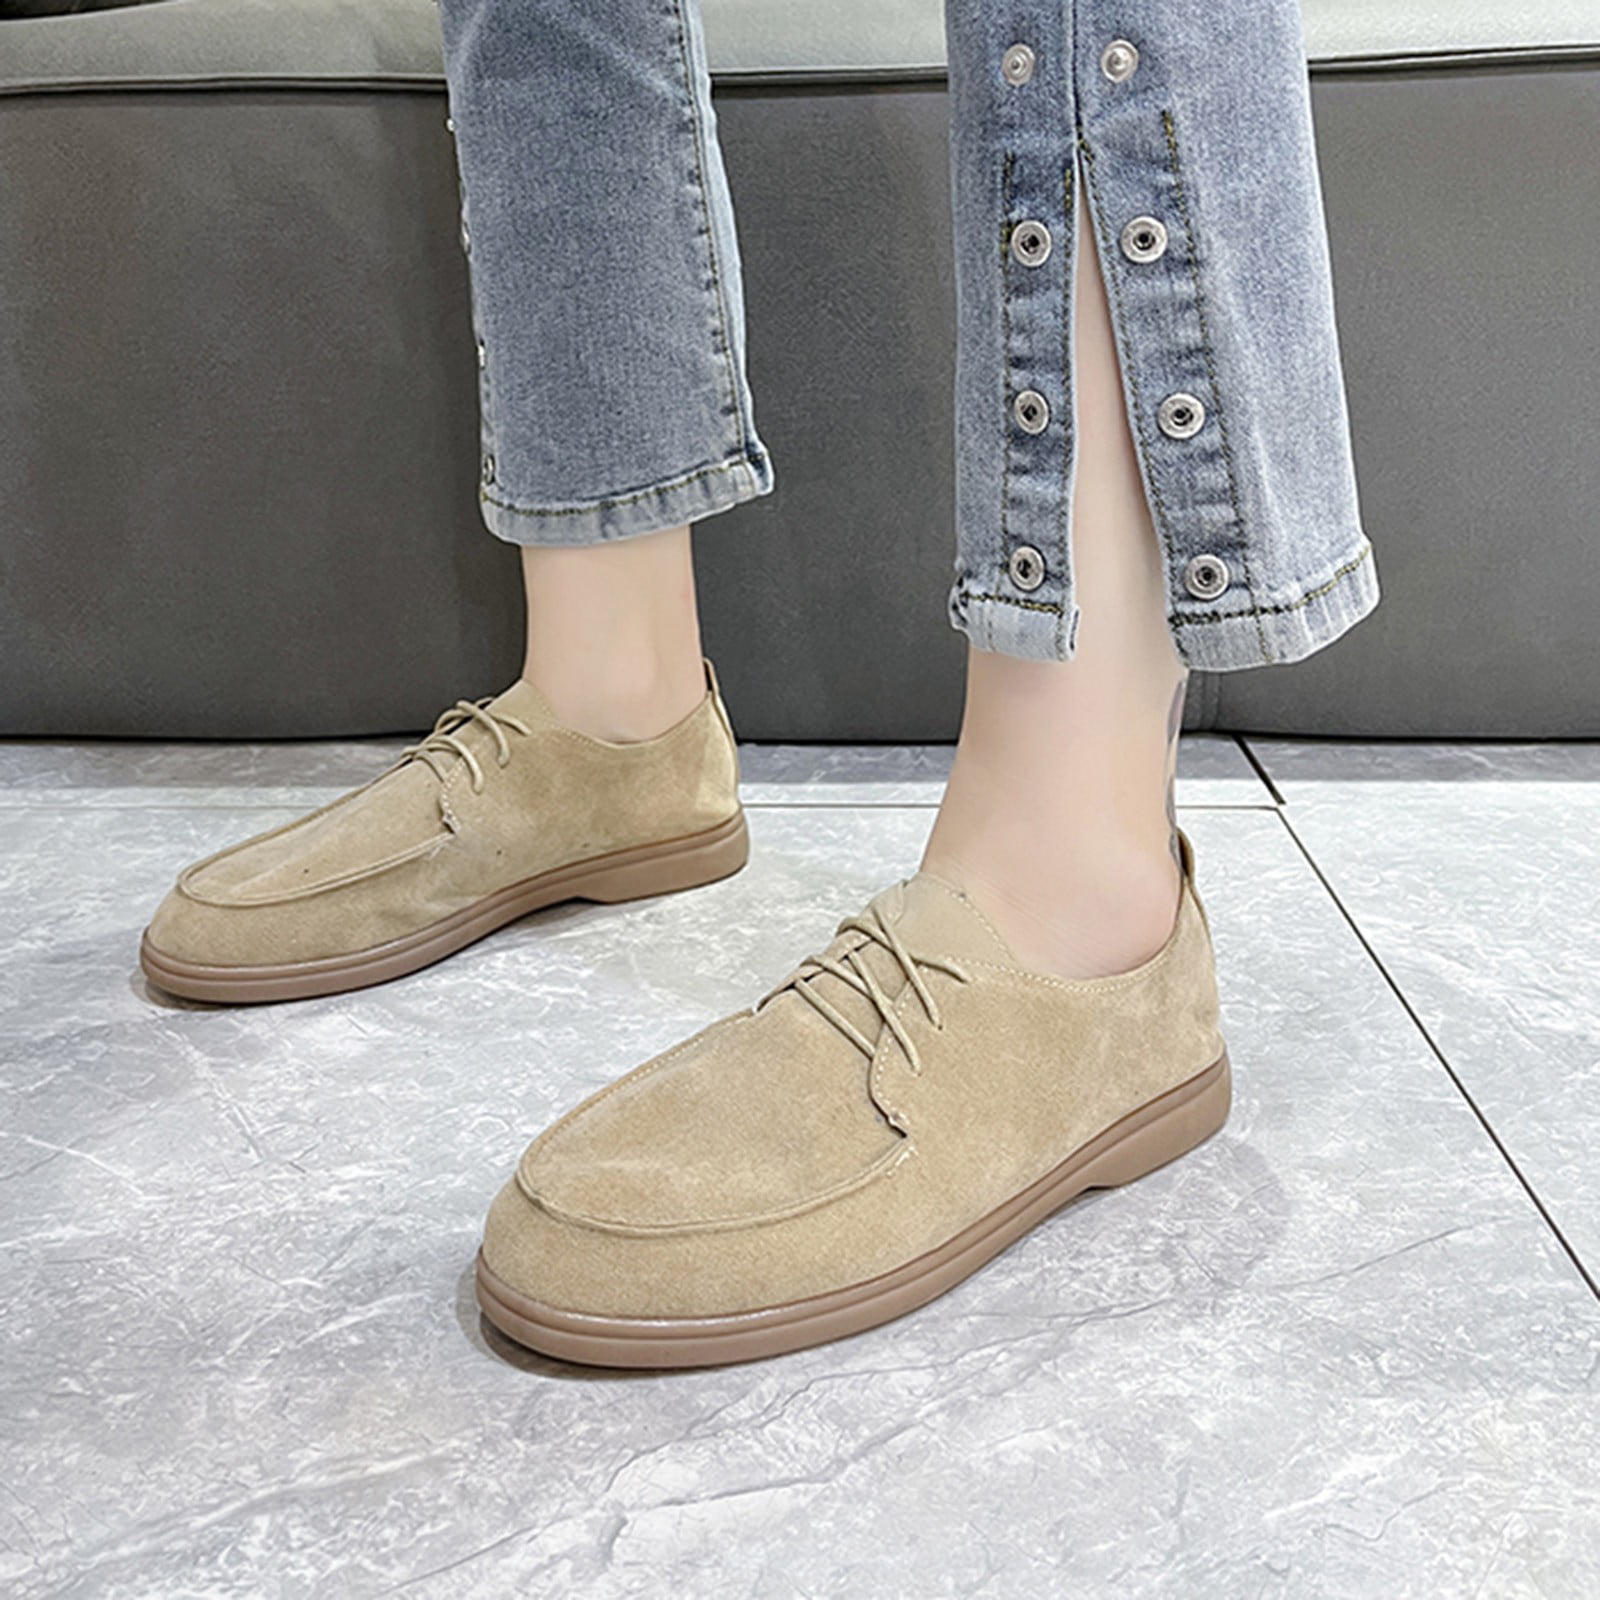 Cathalem Summer Shoes for Women Casual Suede Flat Front Lace Up Casual  Flock Single Shoes Causal Women Shoes Wide Width Casual White 6.5